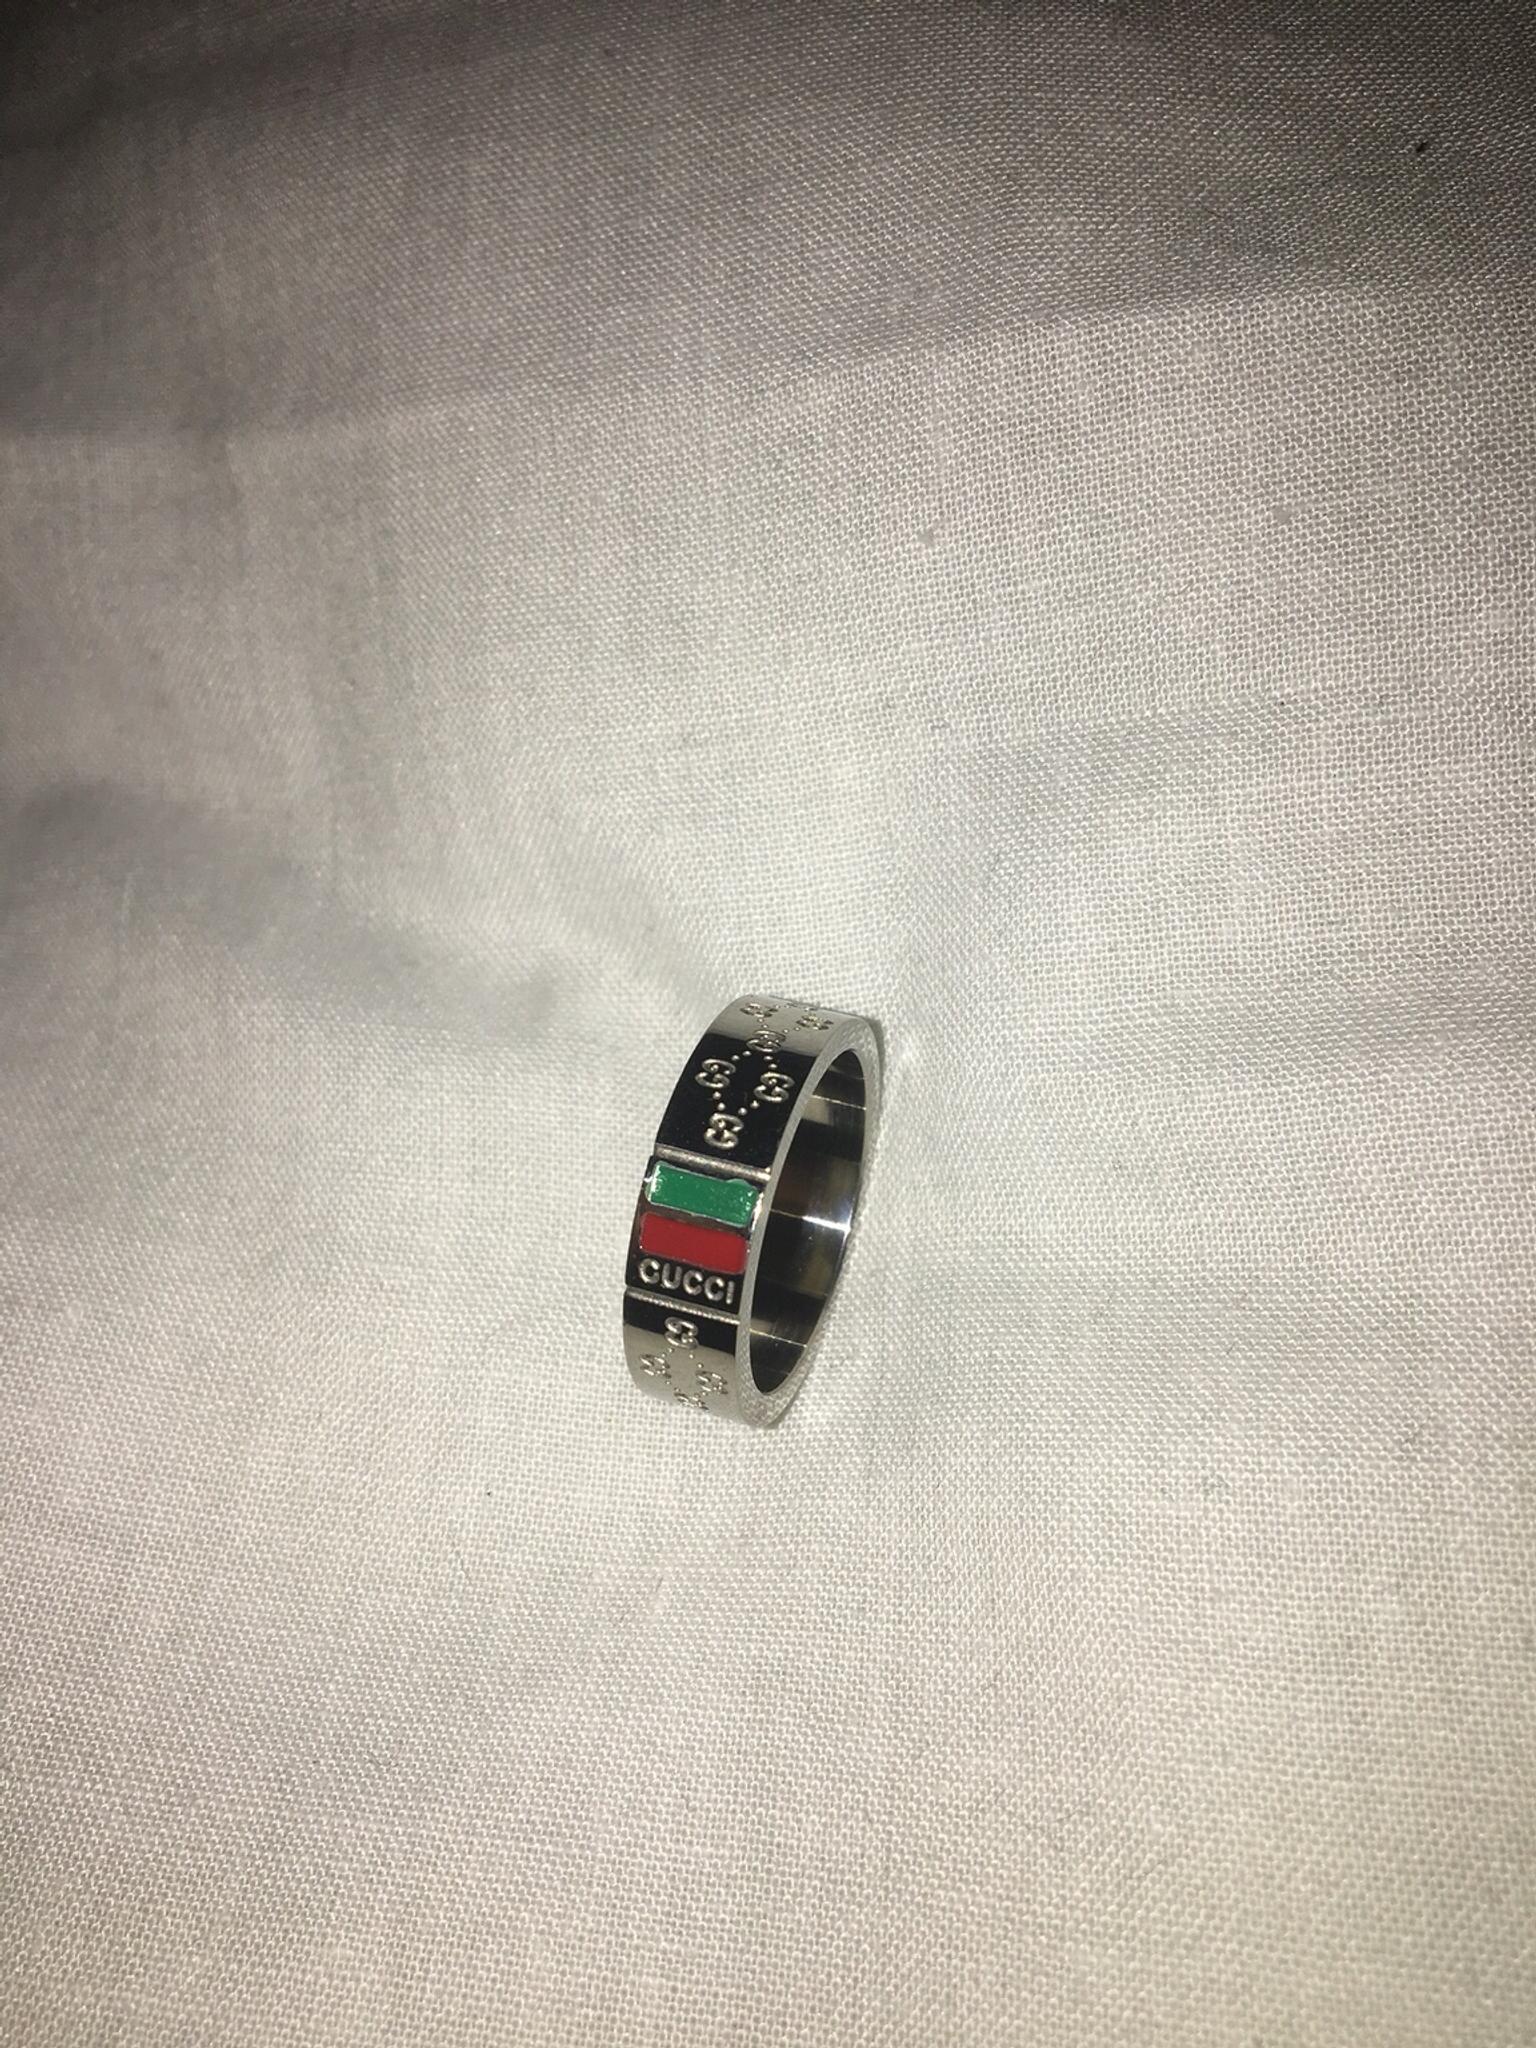 gucci ring red and green